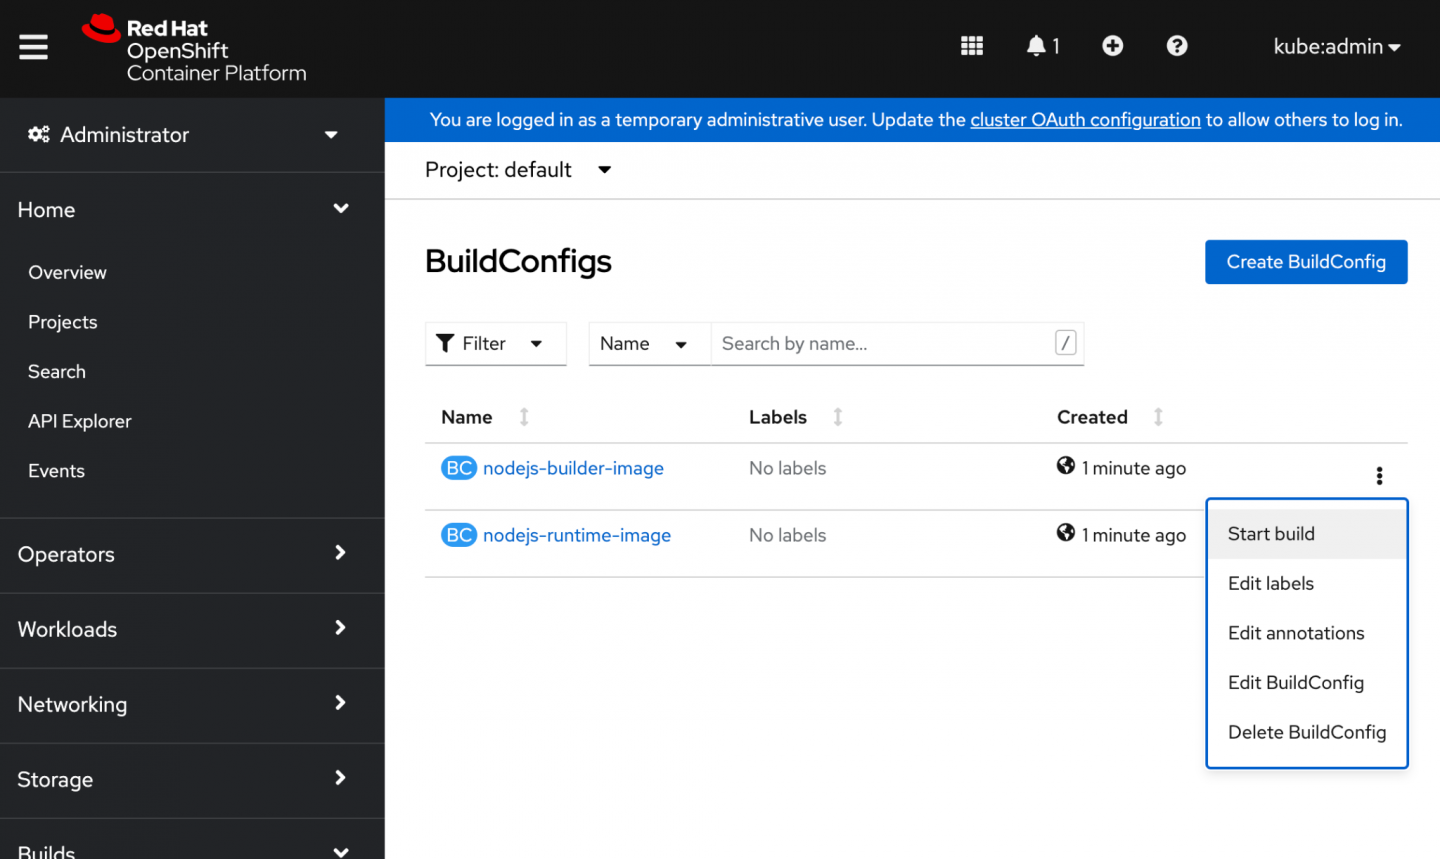 The actions menu provides a "Start build" action on the BuildConfigs interface.